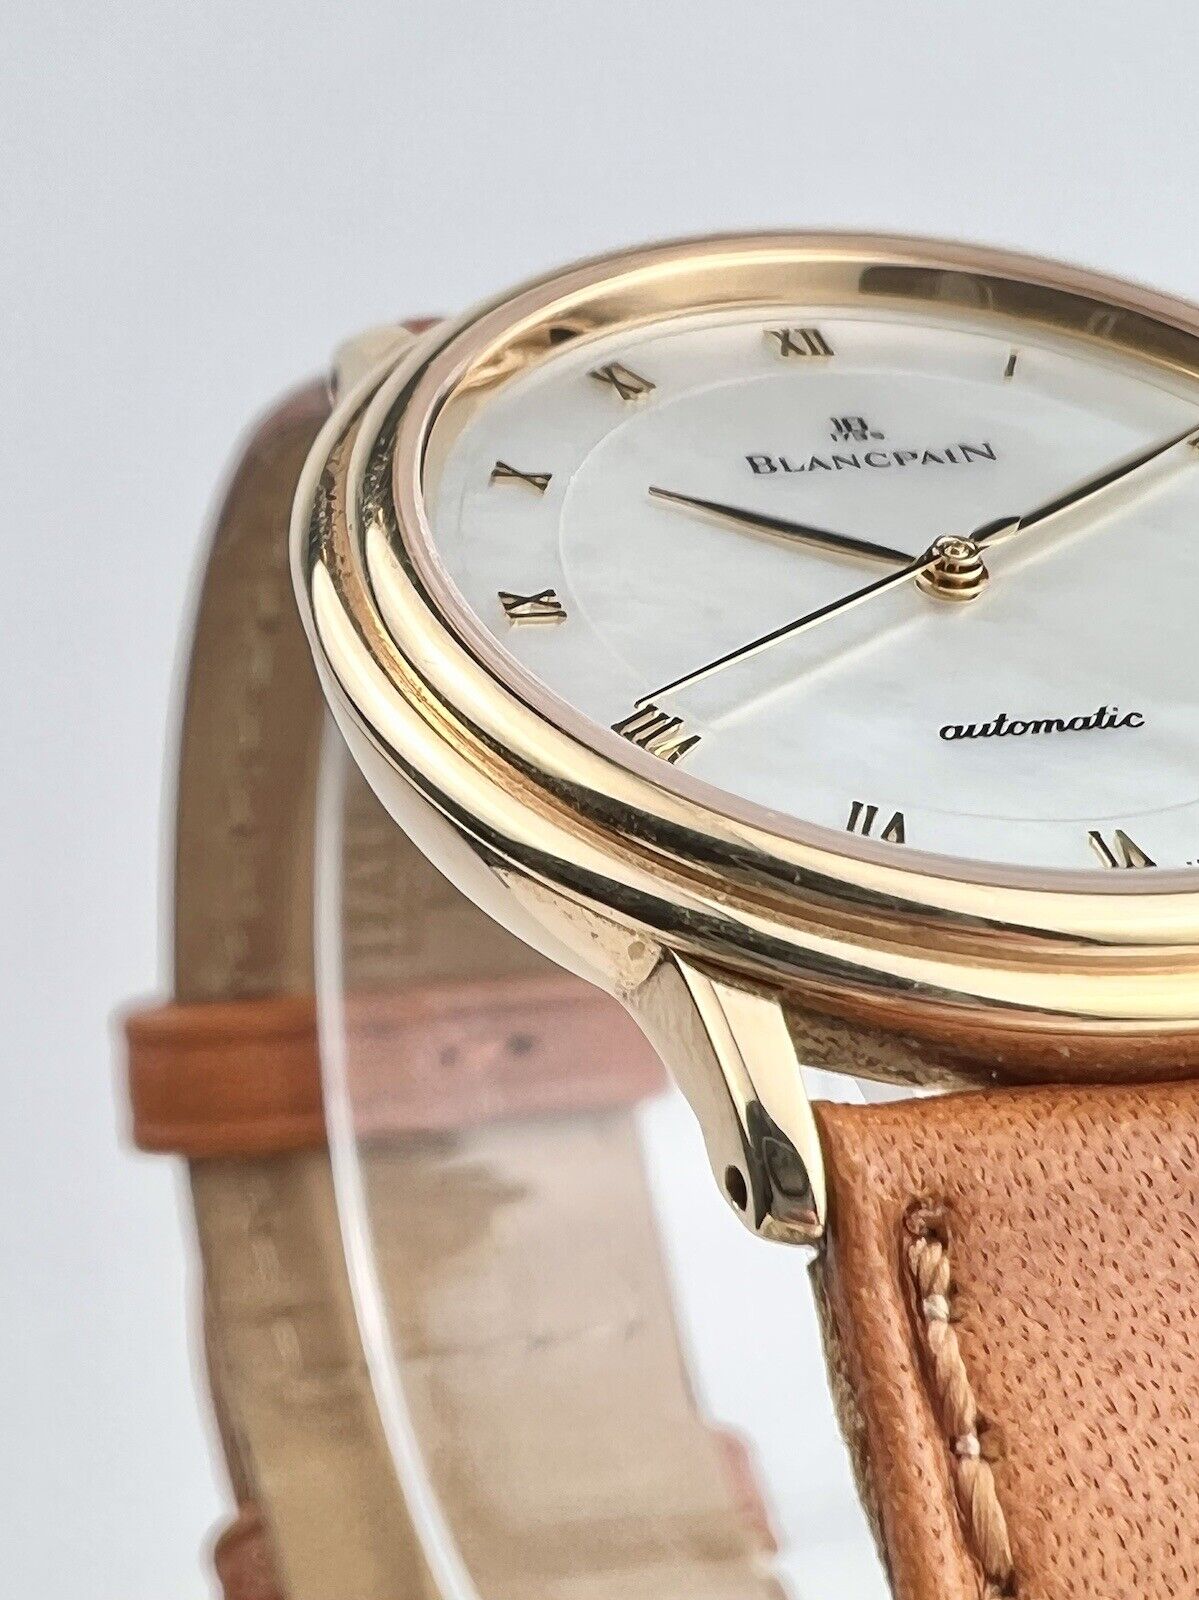 Blancpain Villeret Automatic Wrist Watch for Men in 18K Gold MOP Dial